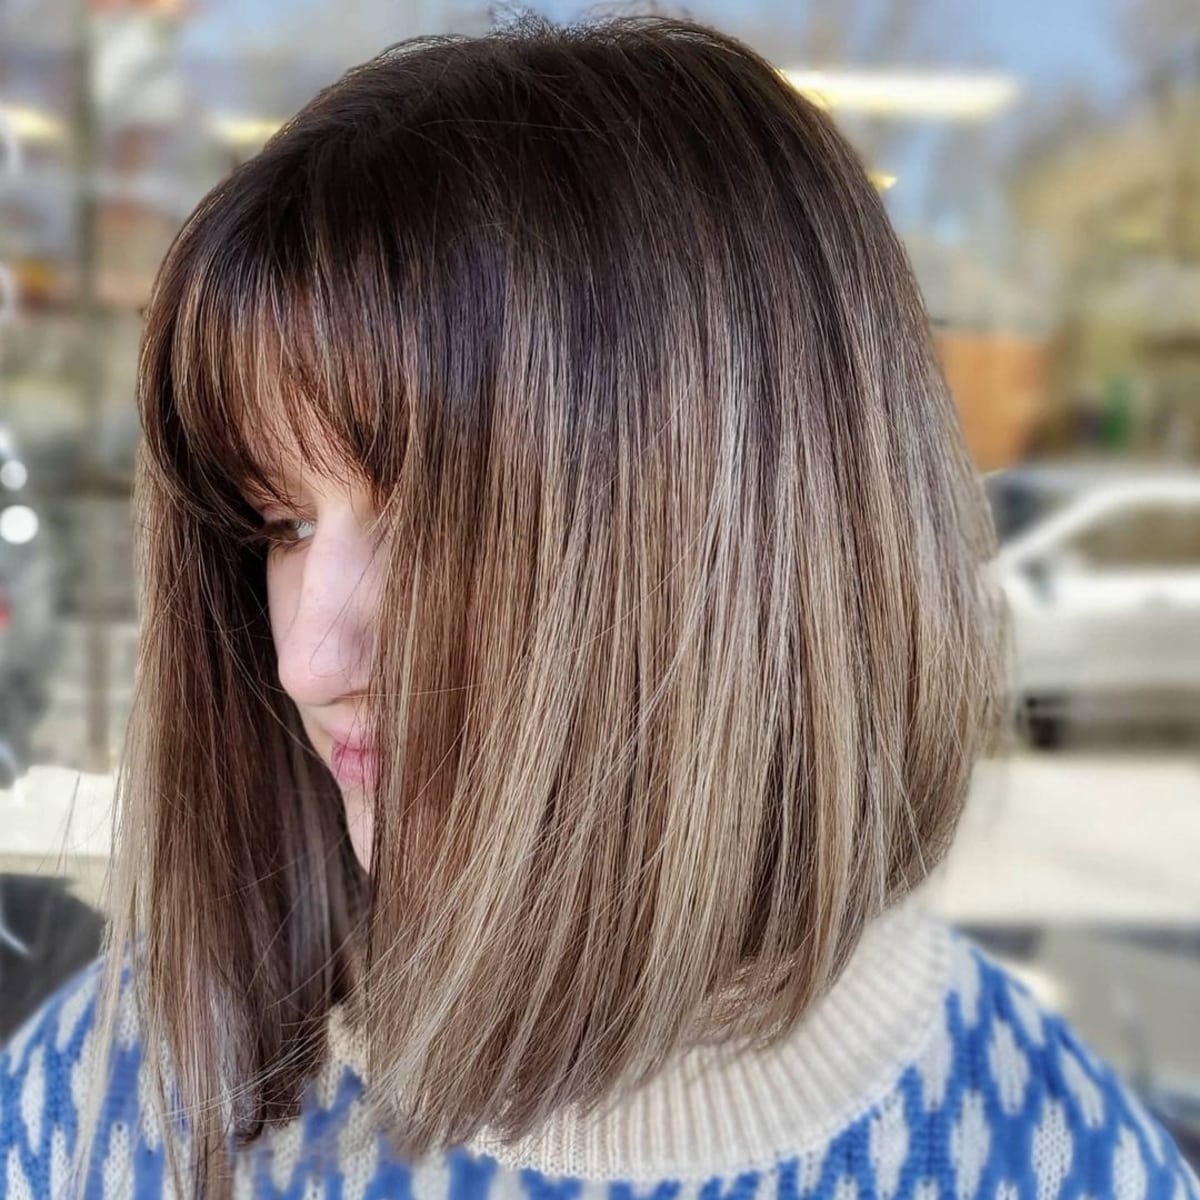 Full Short Bob with Bangs for Thick Hair